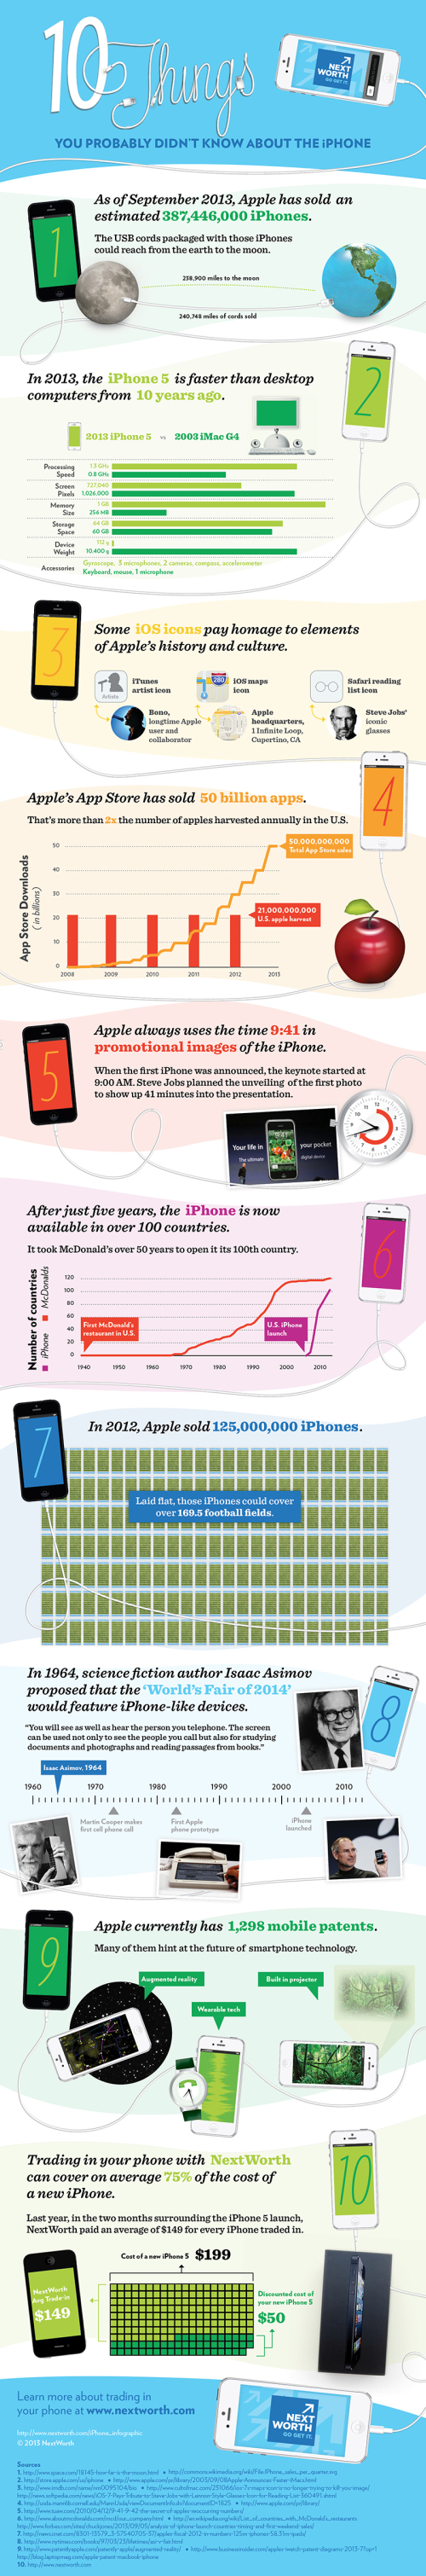 10 Things You Probably Didn't Know About the iPhone infographic